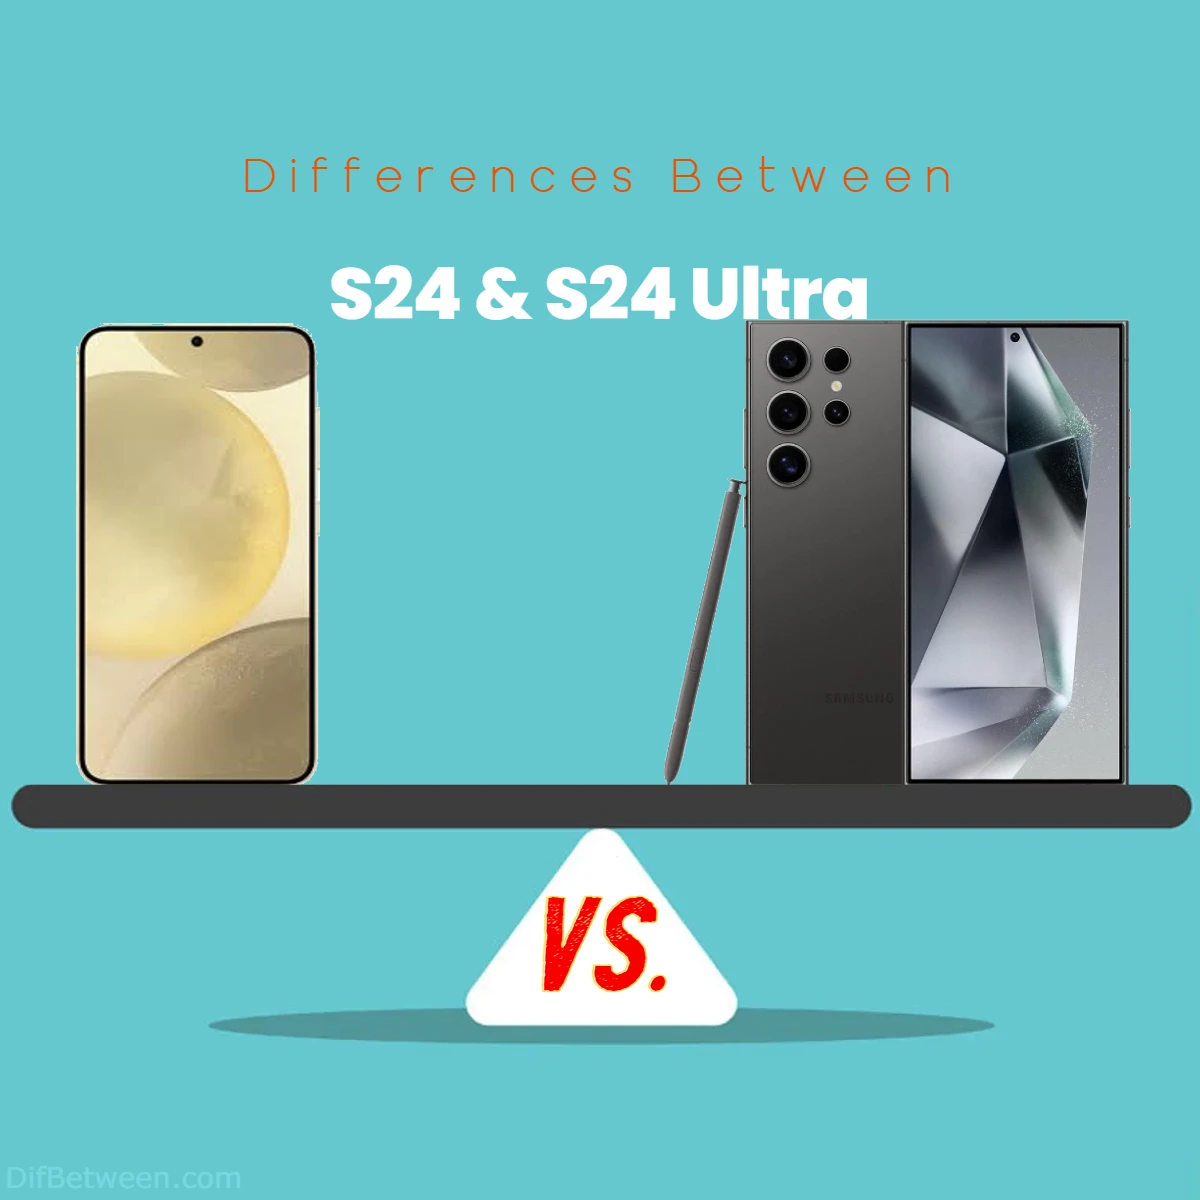 Differences Between Samsung Galaxy S24 and S24 Ultra